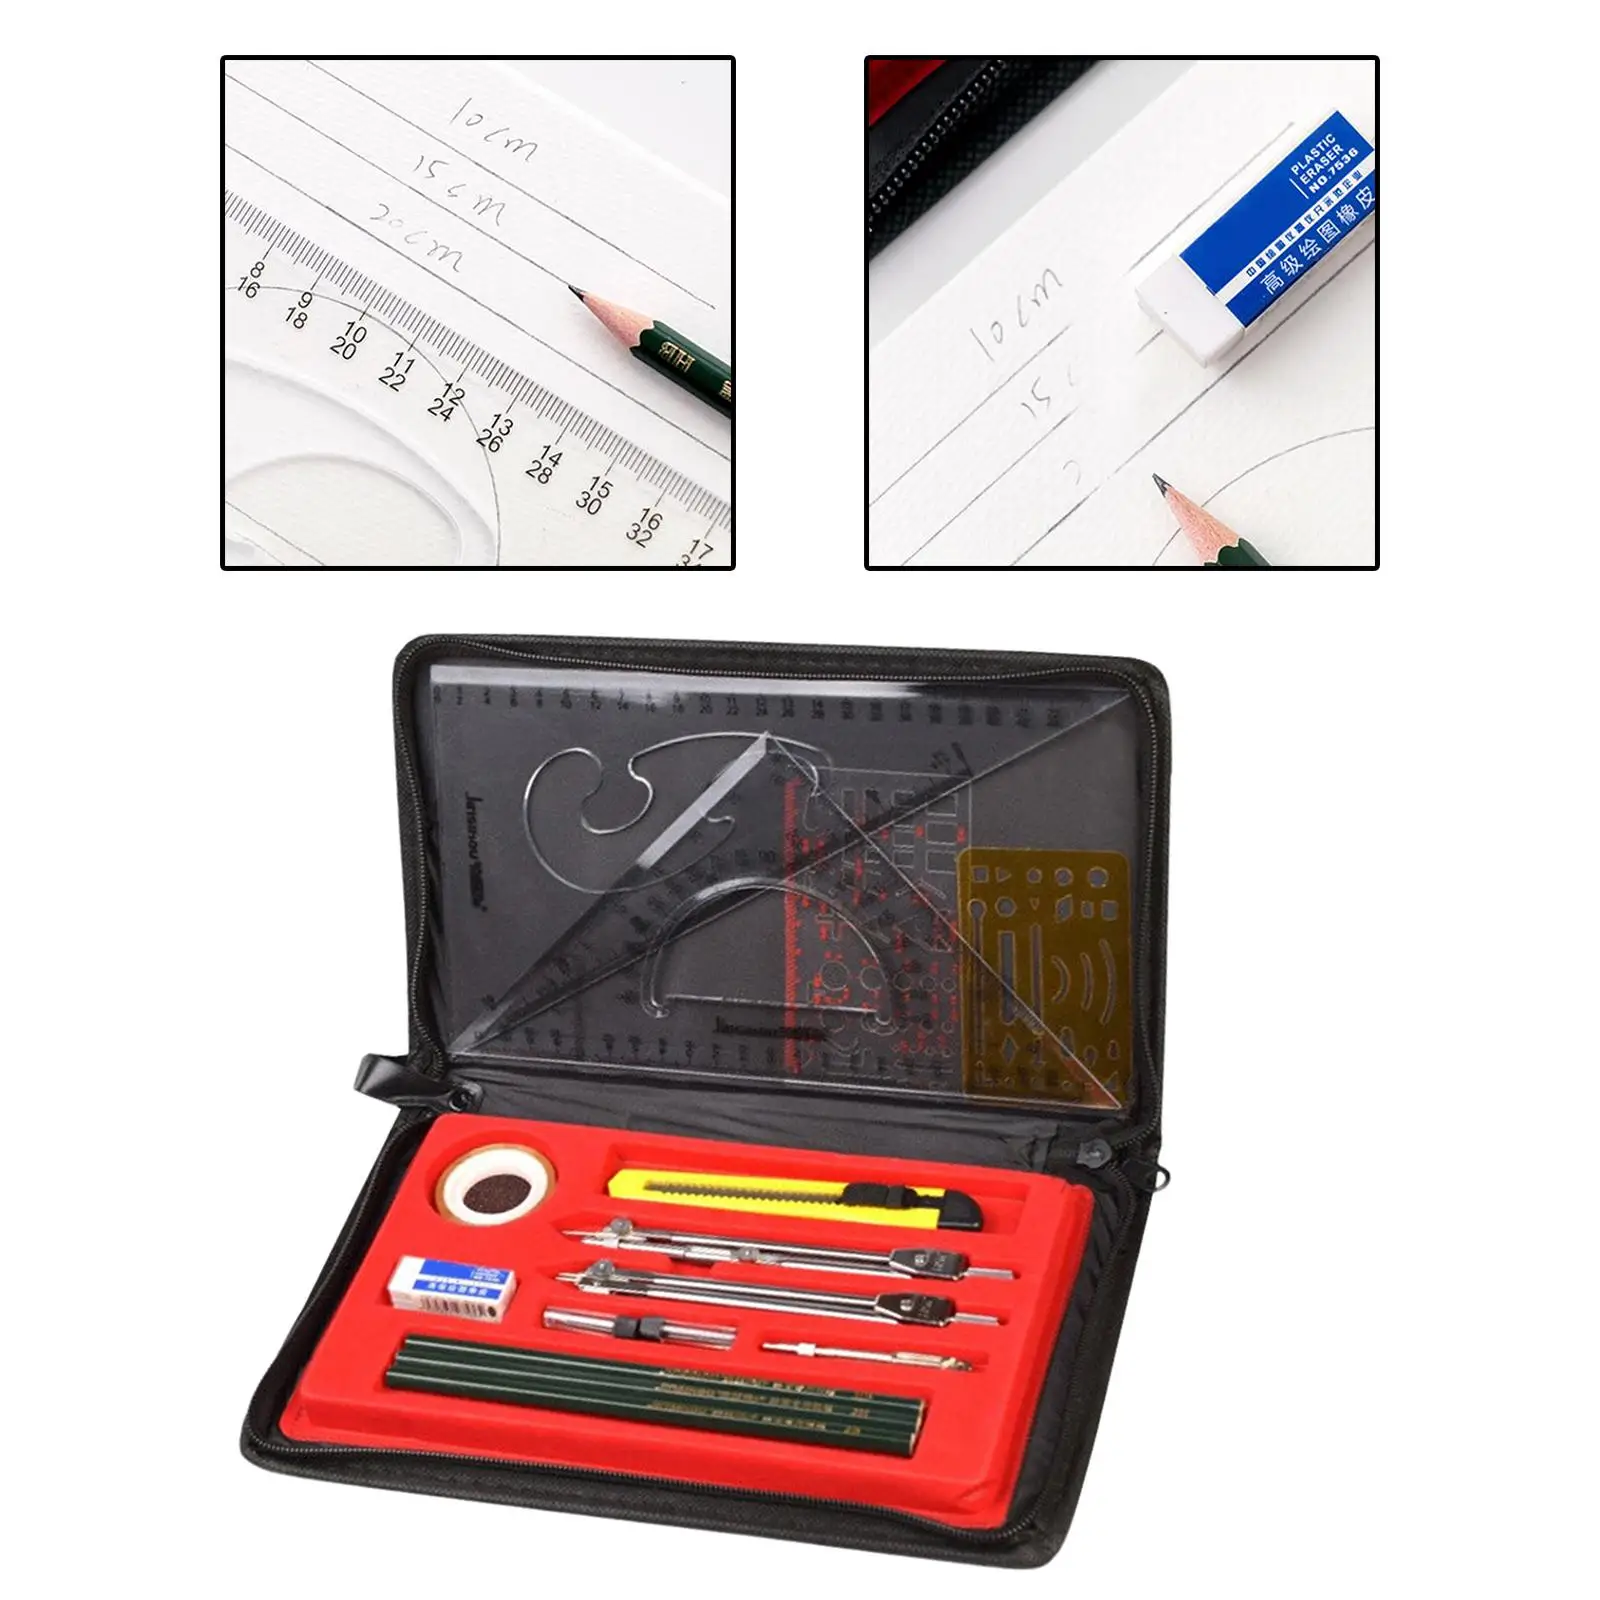 Protractor and Compass Set, Compass for Geometry, Math Compass, Math Compass and Protractor, Geometry Tools Set, Geometry Set